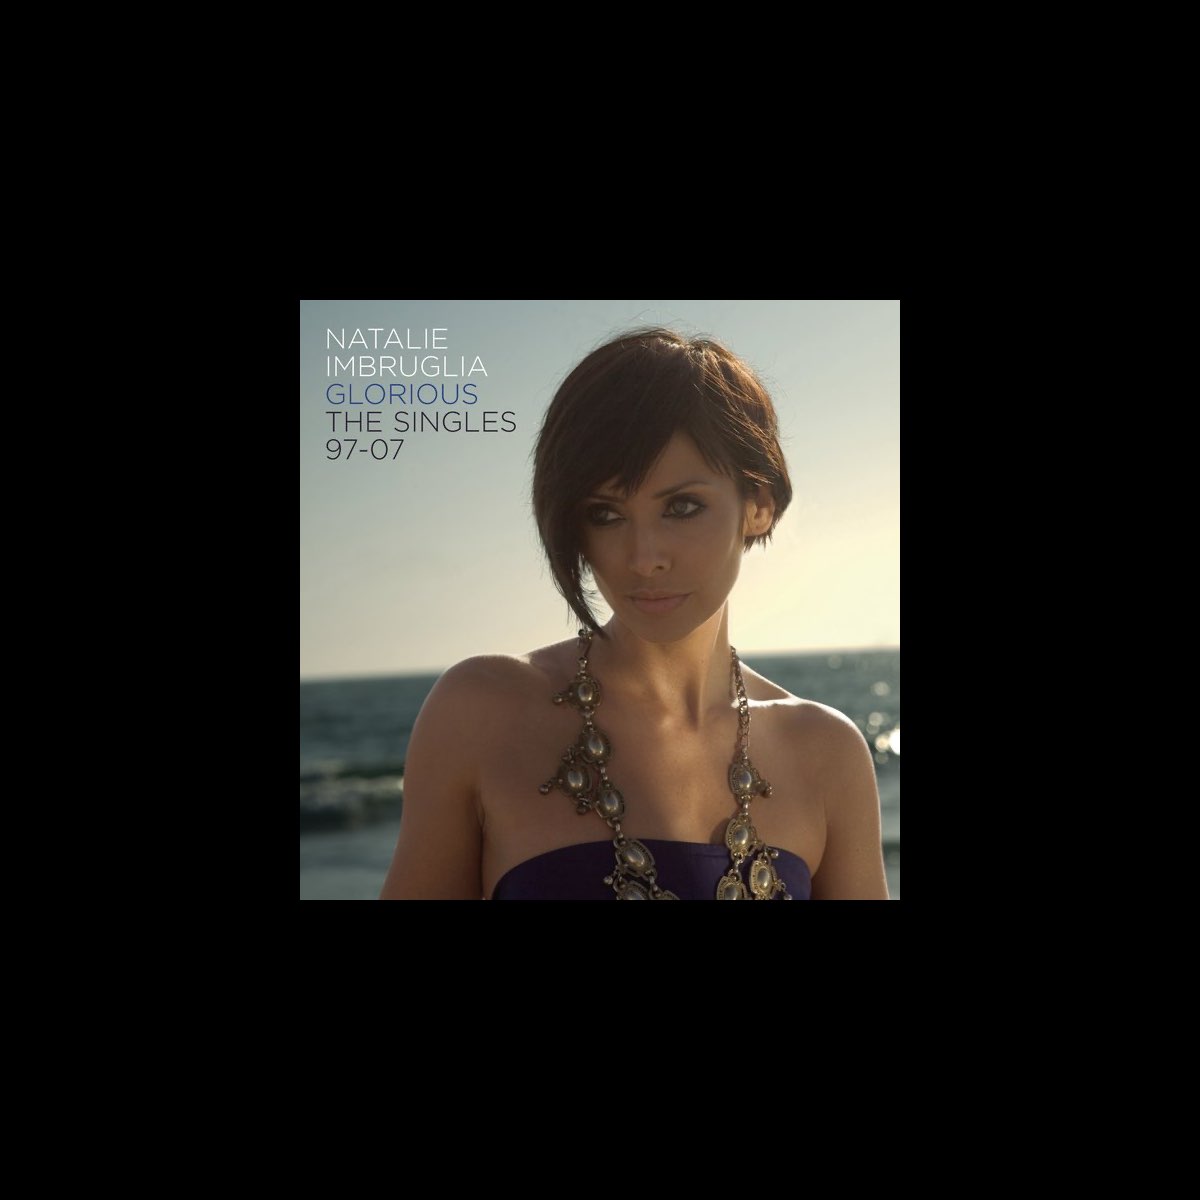 Glorious: The Singles 97 to 07 - Album by Natalie Imbruglia - Apple Music